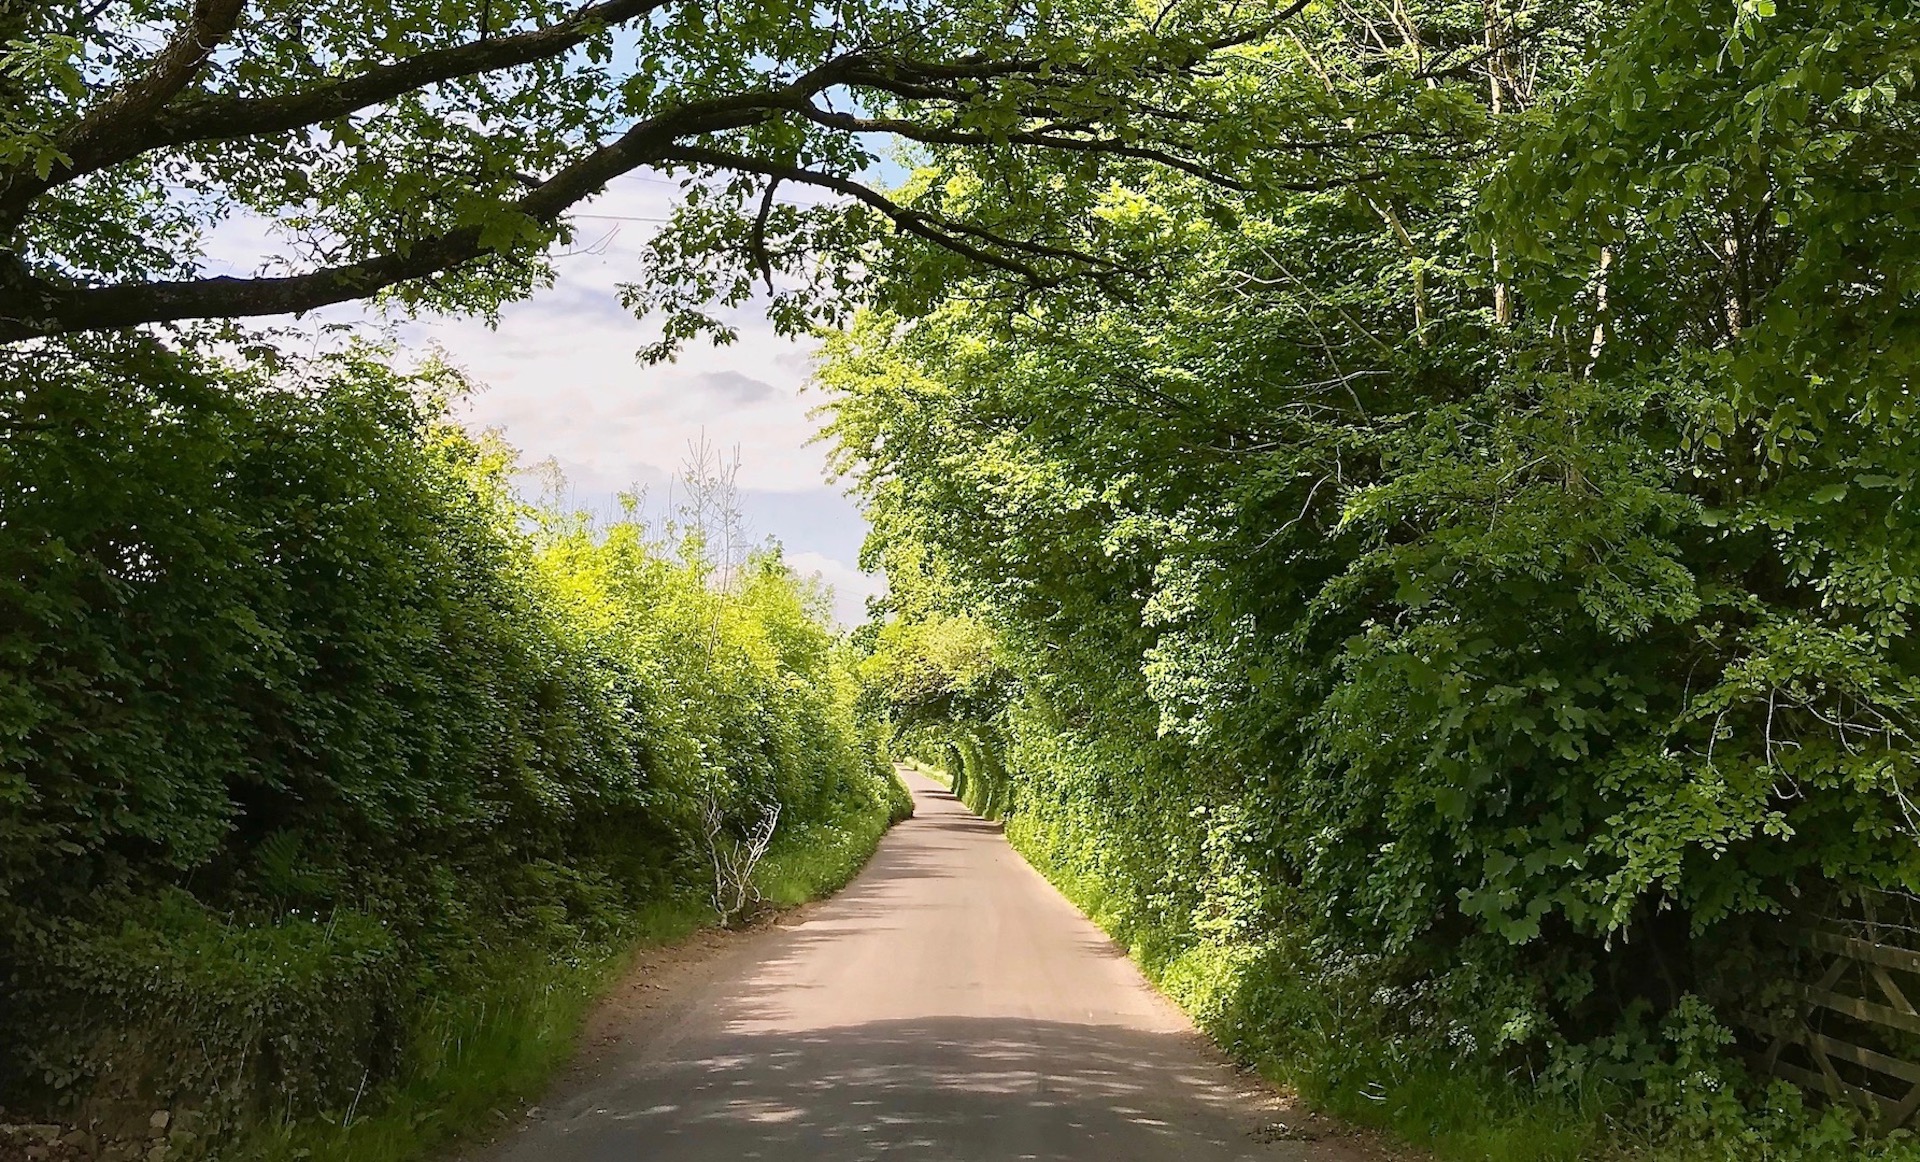 An empty Exmoor lane stretches into the distance under a cathedral of trees.